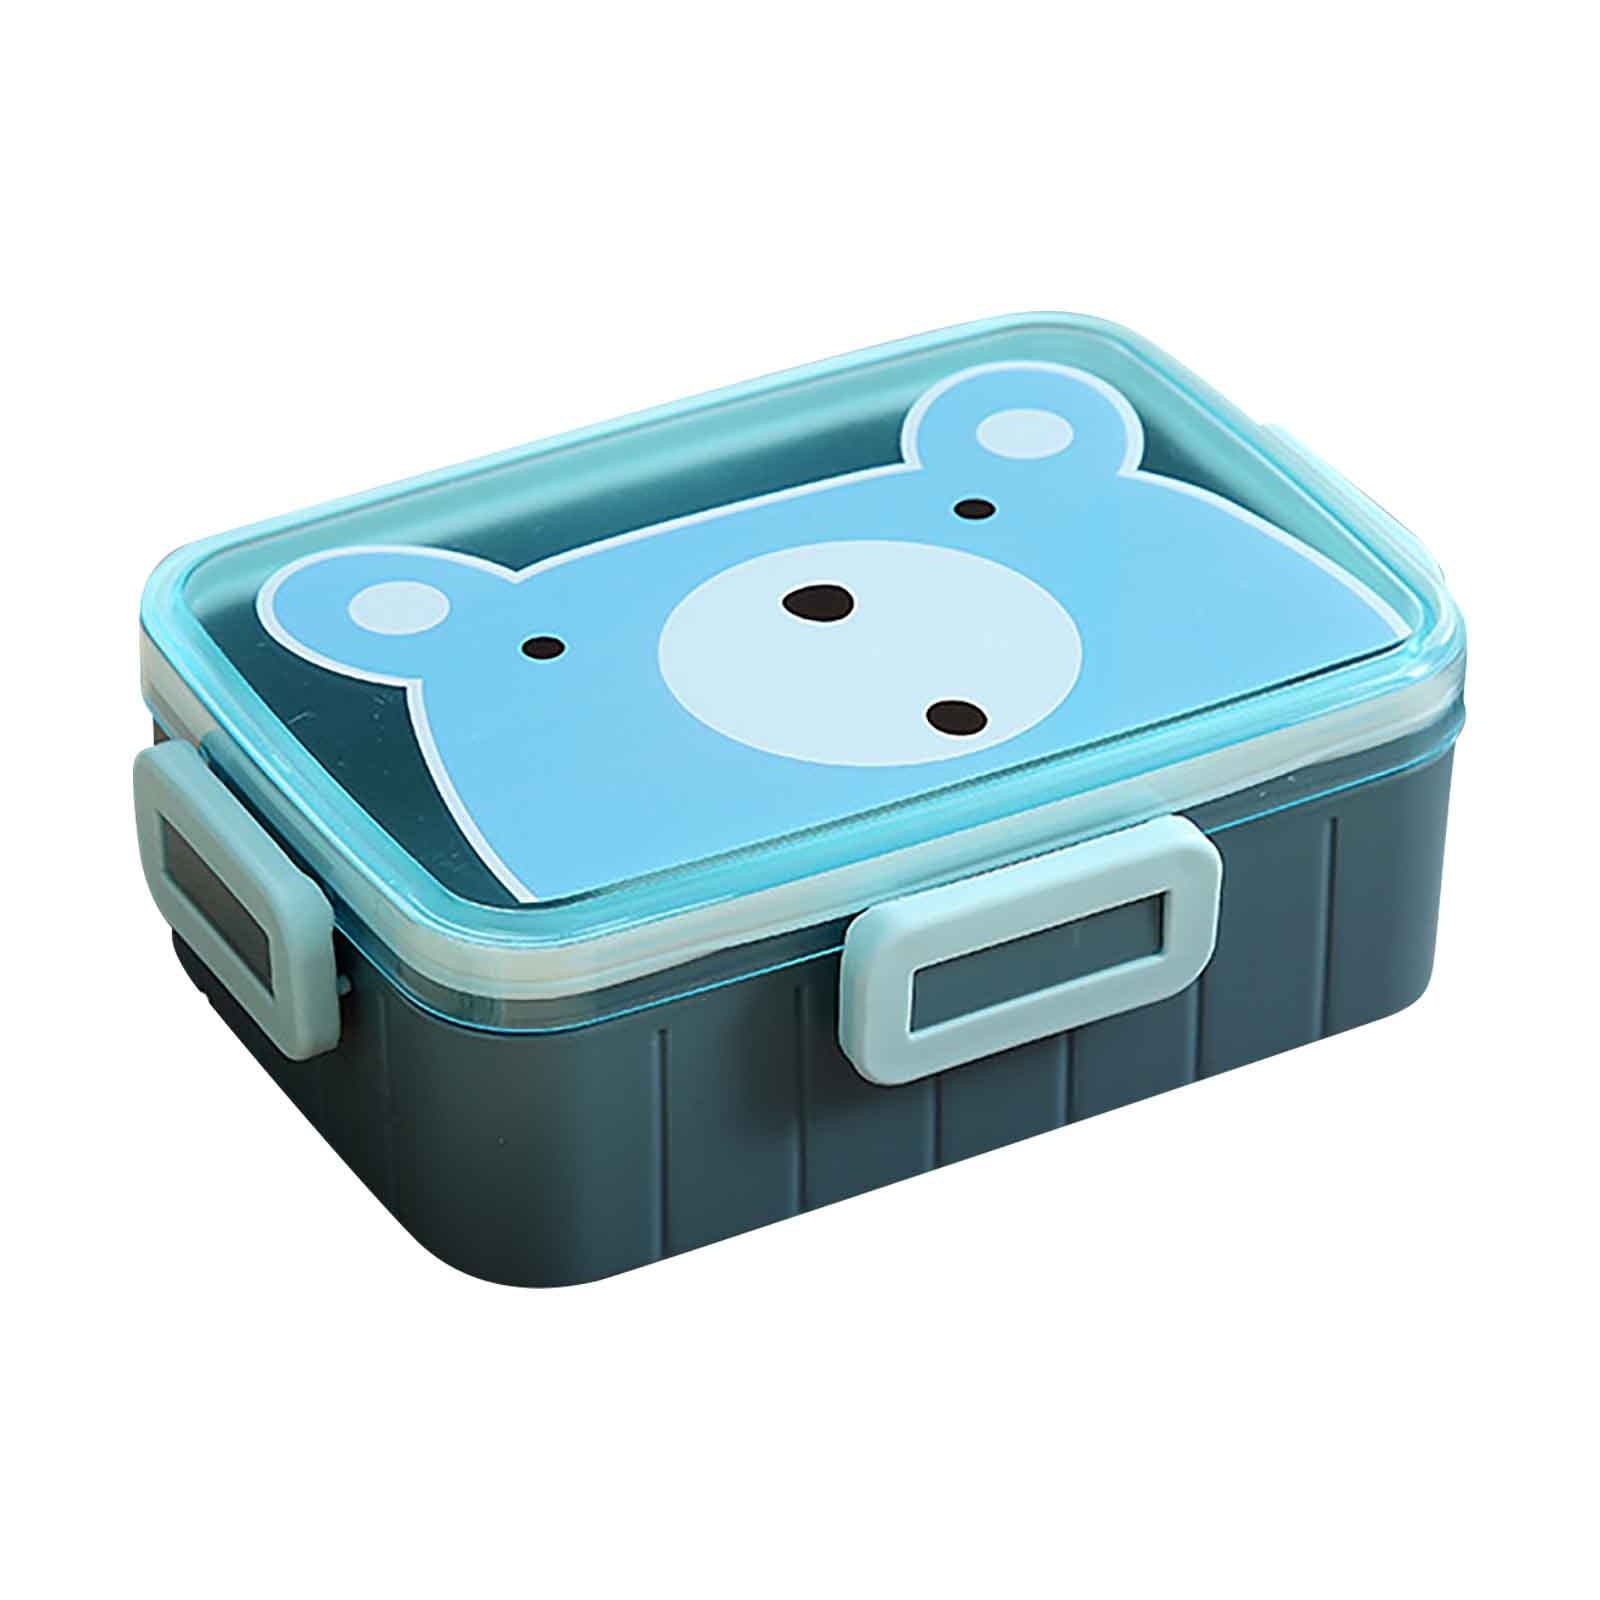 XMMSWDLA Kids Bento Lunch Box Pink Lunch Boxmicrowave Oven Heating Lunch  Box Rectangular Student Lunch Box Storage Box Bento Box Adult